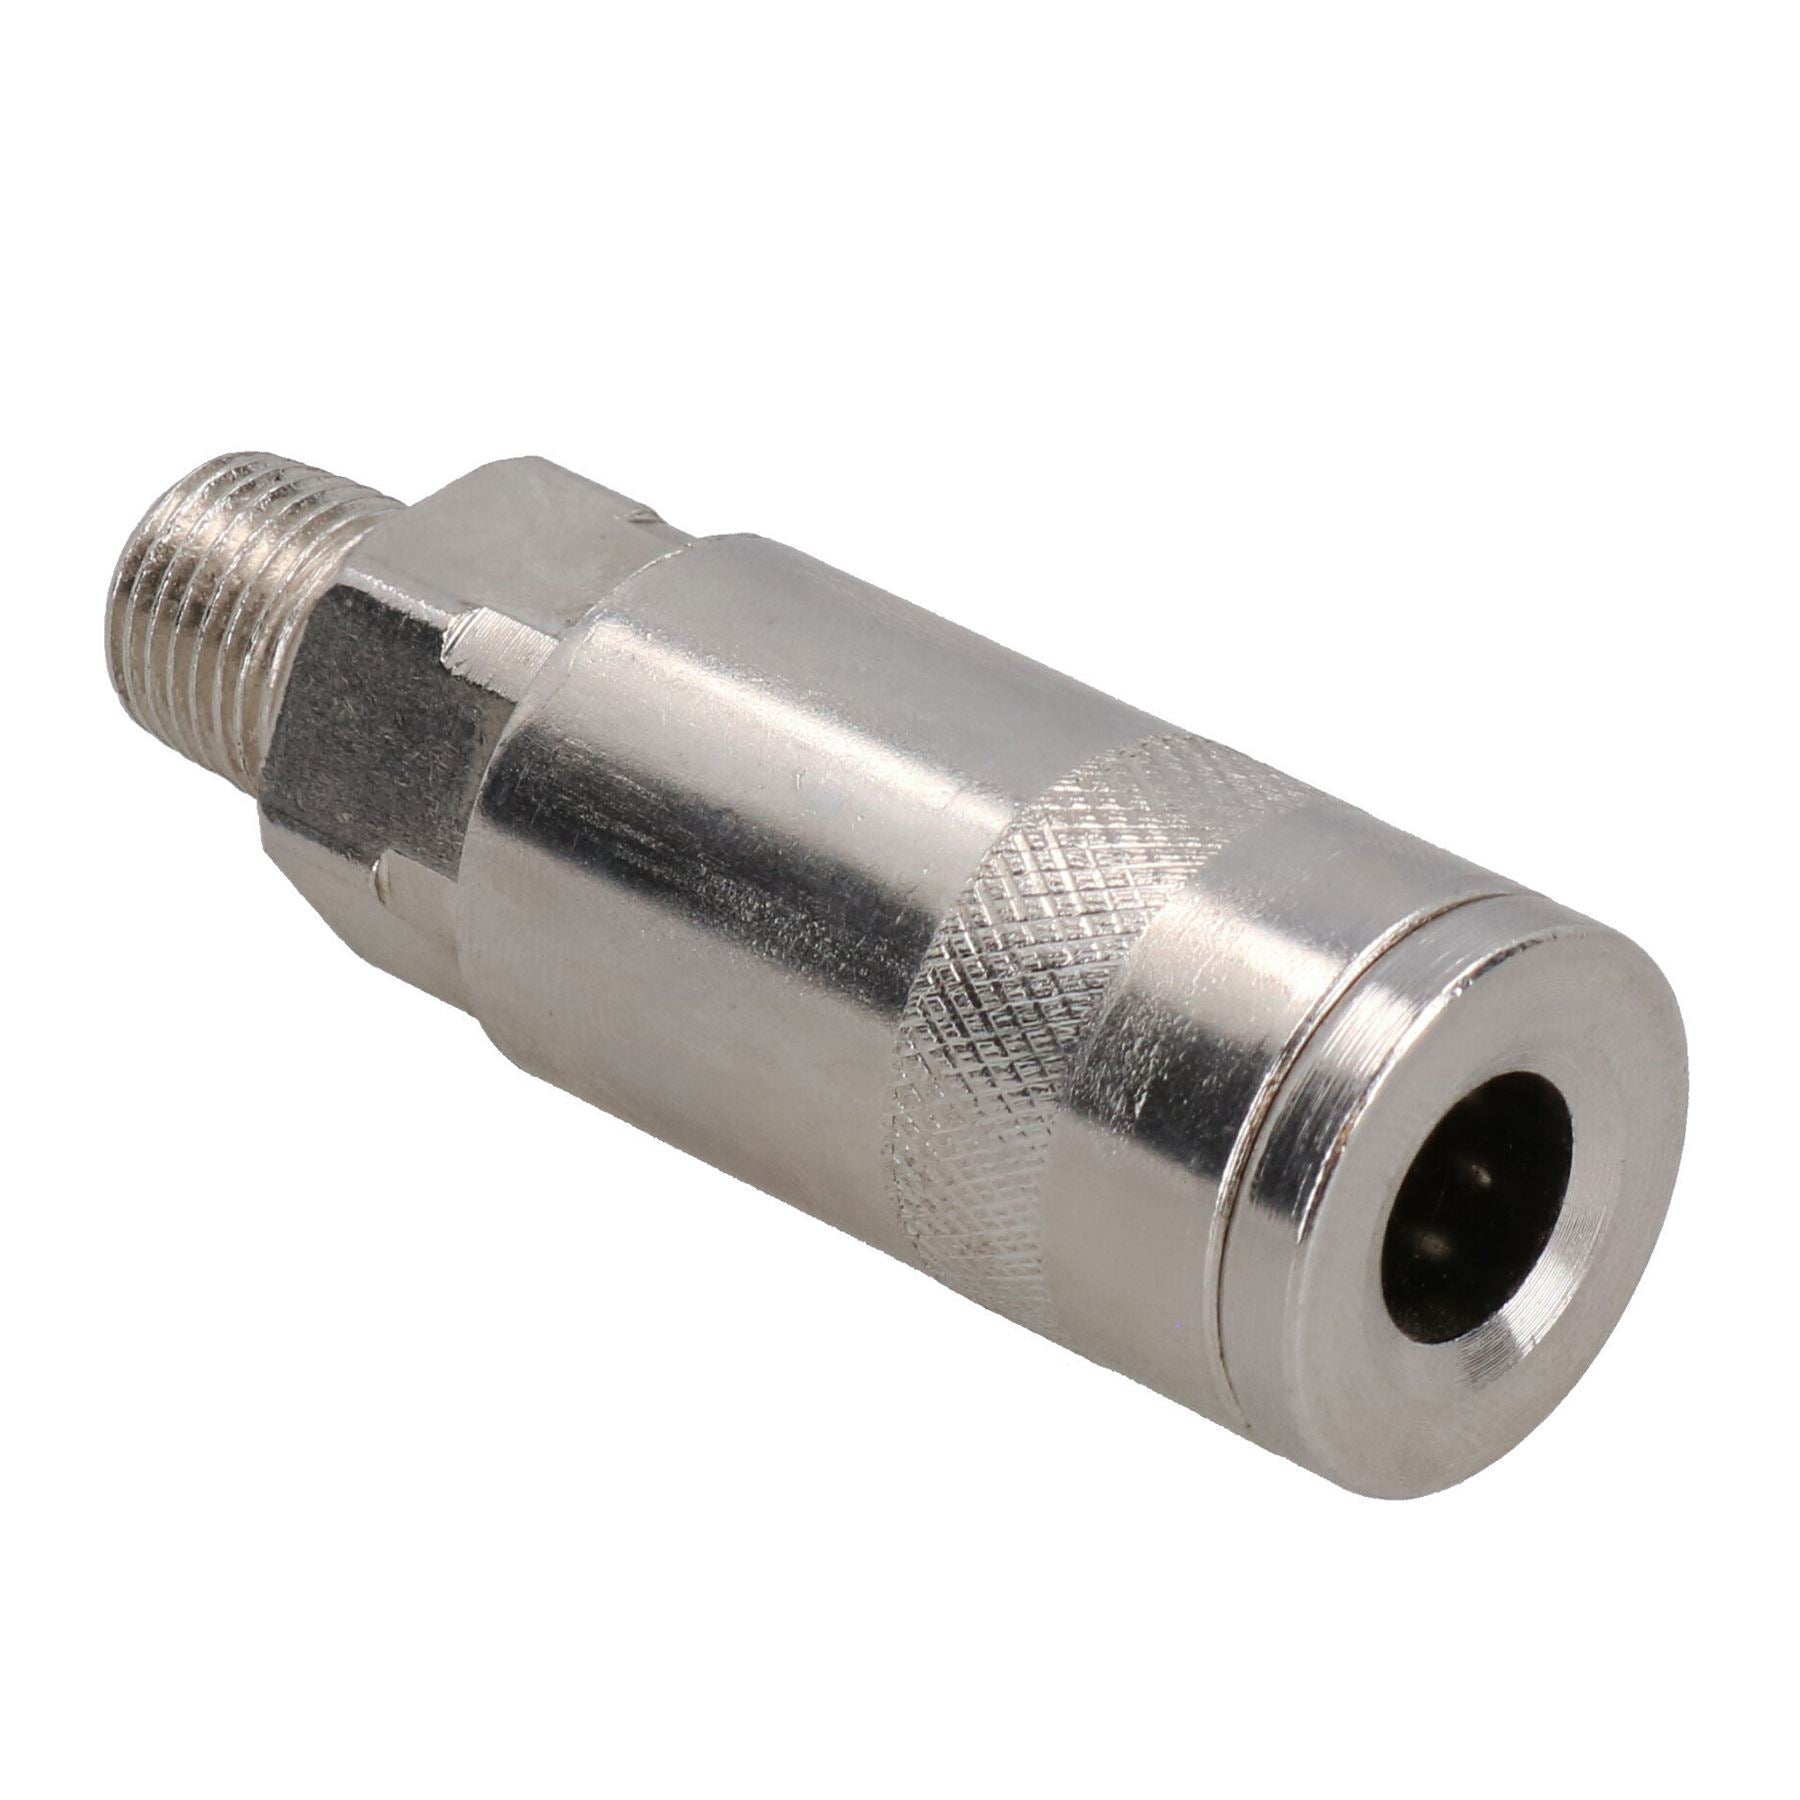 1/4” BSP Quick Release Coupler Connector With Male Thread For Air Hose Compressors